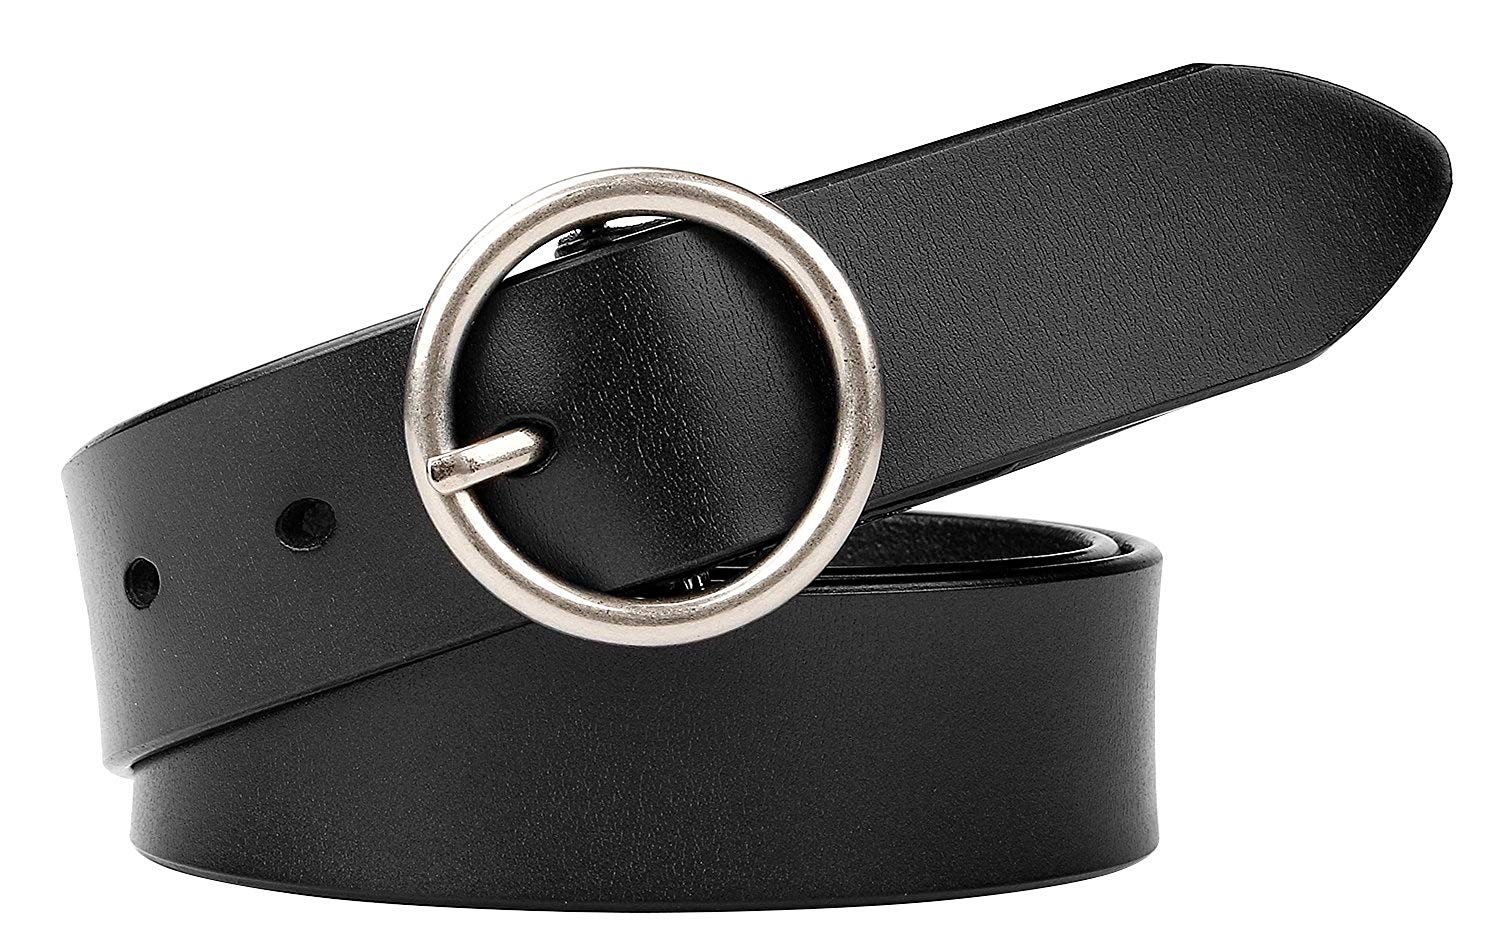 JASGOOD Women's Leather Belt Fashion Ladies White Belts for Jeans Dress  with Double O Ring Buckle